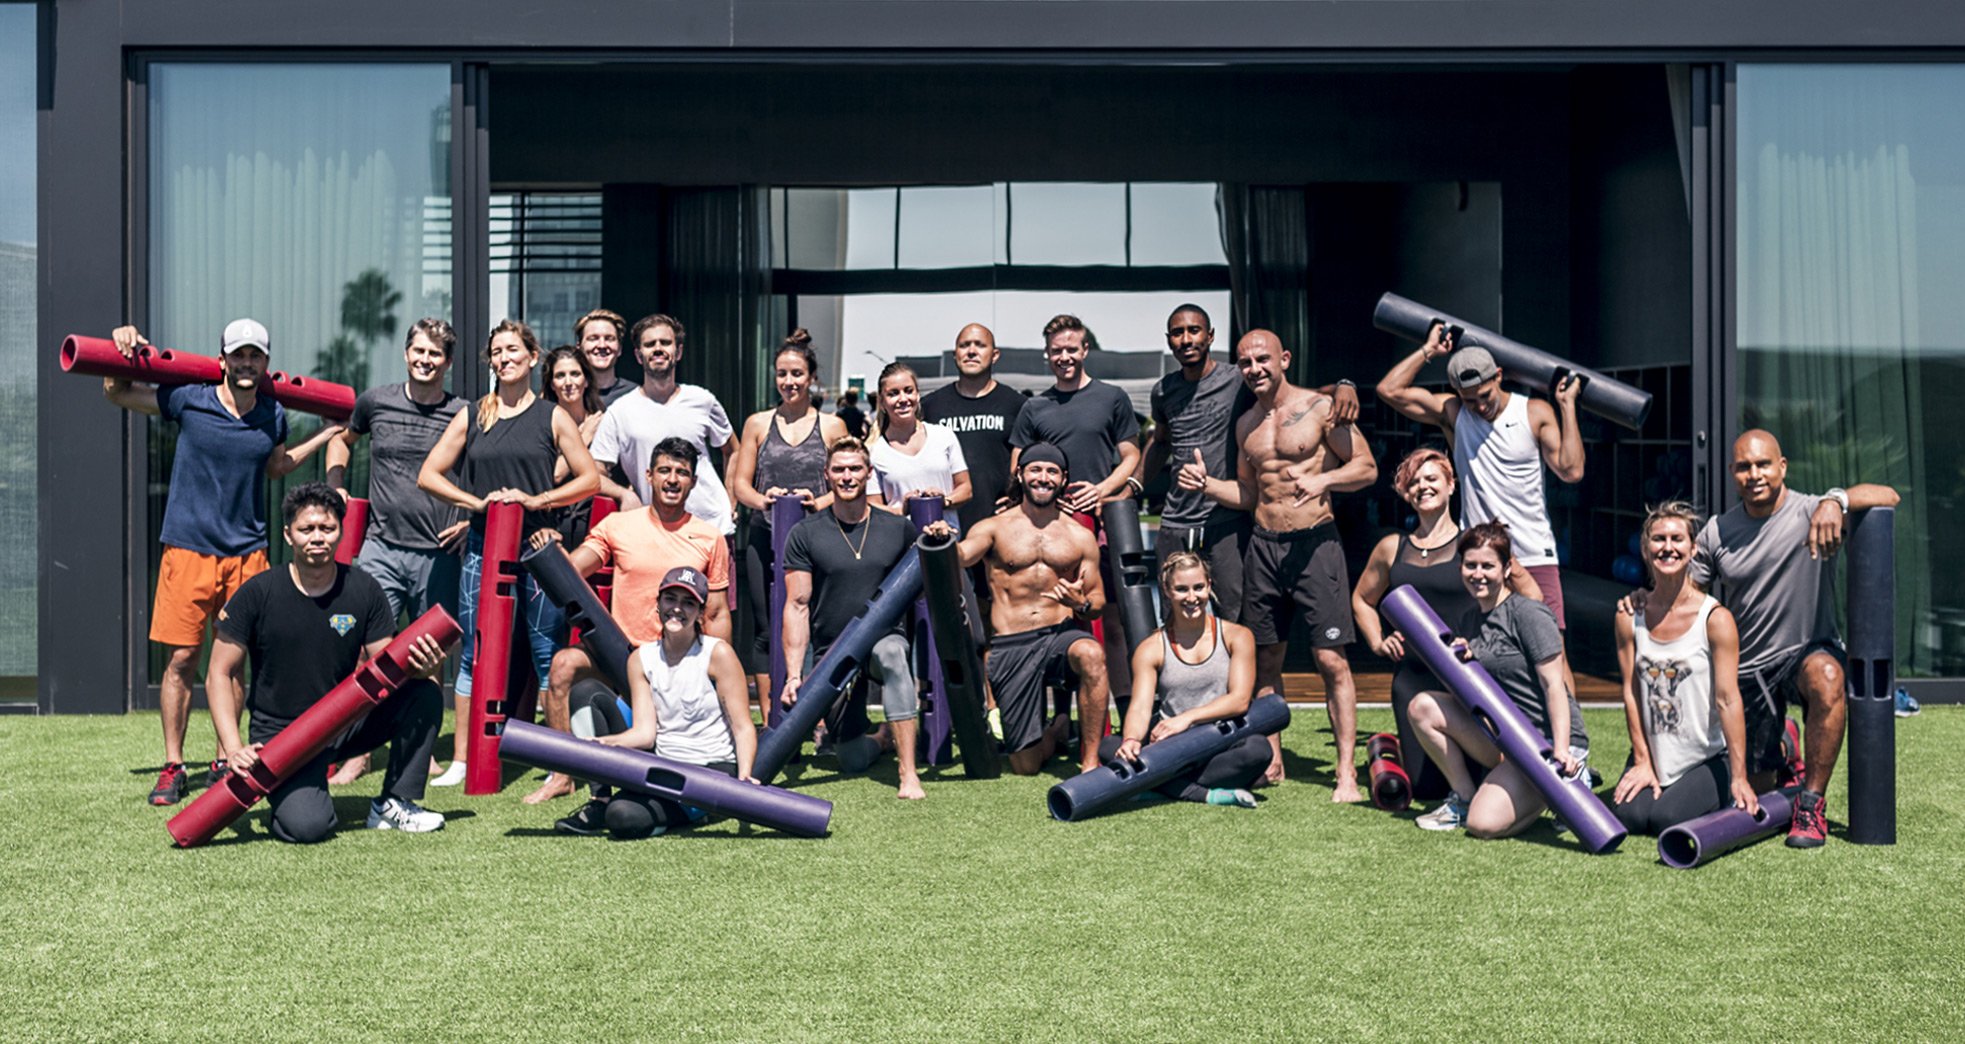 Free HIIT Fitness Class Hosted by OLIVERS Apparel